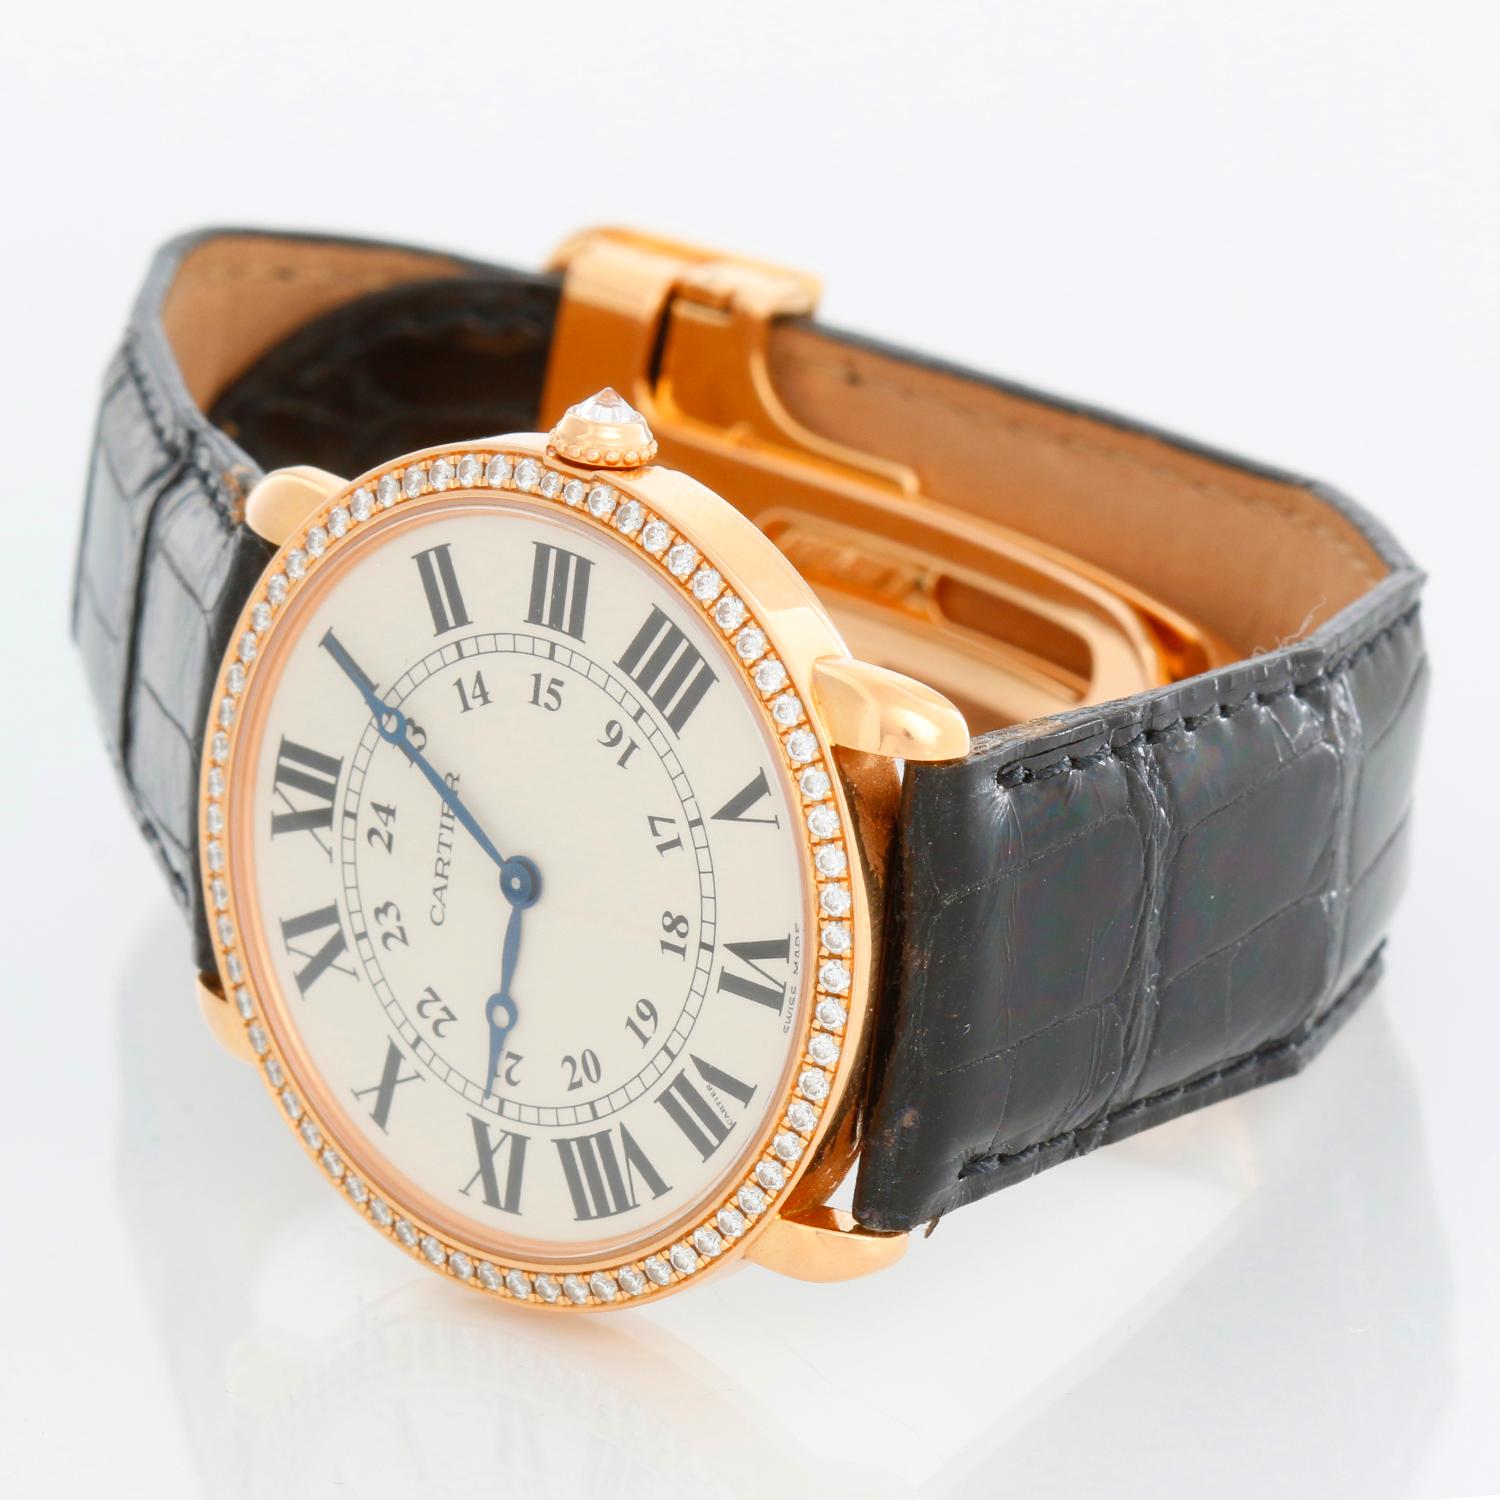 Cartier 18K Rose Gold Ronde Louis Ladies Watch 2889 - Manual winding. 18K Rose Gold case (36 mm) with diamonds. Ivory dial with Roman numerals. Black alligator strap with 18K Rose Gold deployant clasp. Pre-owned with Cartier box. 